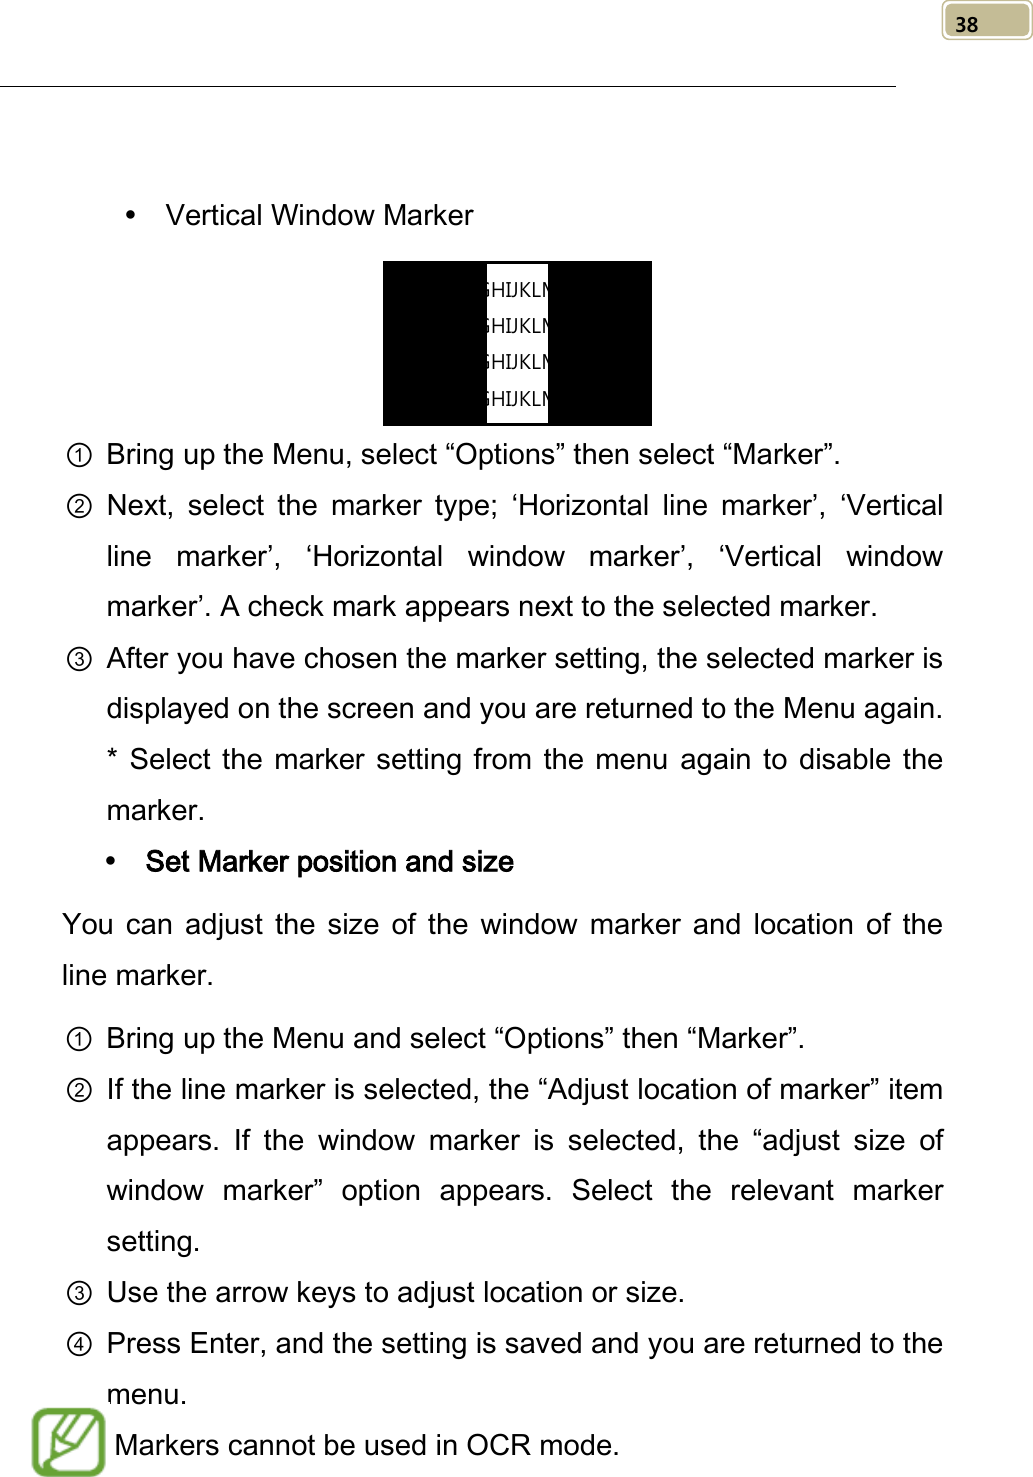   38    Vertical Window Marker     ① Bring up the Menu, select “Options” then select “Marker”. ② Next, select the marker type; ‘Horizontal line marker’,  ‘Vertical line marker’,  ‘Horizontal  window marker’,  ‘Vertical window marker’. A check mark appears next to the selected marker. ③ After you have chosen the marker setting, the selected marker is displayed on the screen and you are returned to the Menu again. *  Select the  marker  setting from the menu again to disable the marker.  Set Marker position and size You can adjust  the  size of the  window marker and location of the line marker. ① Bring up the Menu and select “Options” then “Marker”. ② If the line marker is selected, the “Adjust location of marker” item appears. If the  window marker is selected,  the “adjust size of window marker” option appears. Select the  relevant marker setting. ③ Use the arrow keys to adjust location or size.   ④ Press Enter, and the setting is saved and you are returned to the menu.   Markers cannot be used in OCR mode. ABCDEFGHIJKLMNOPQR ABCDEFGHIJKLMNOPQR ABCDEFGHIJKLMNOPQR ABCDEFGHIJKLMNOPQR  